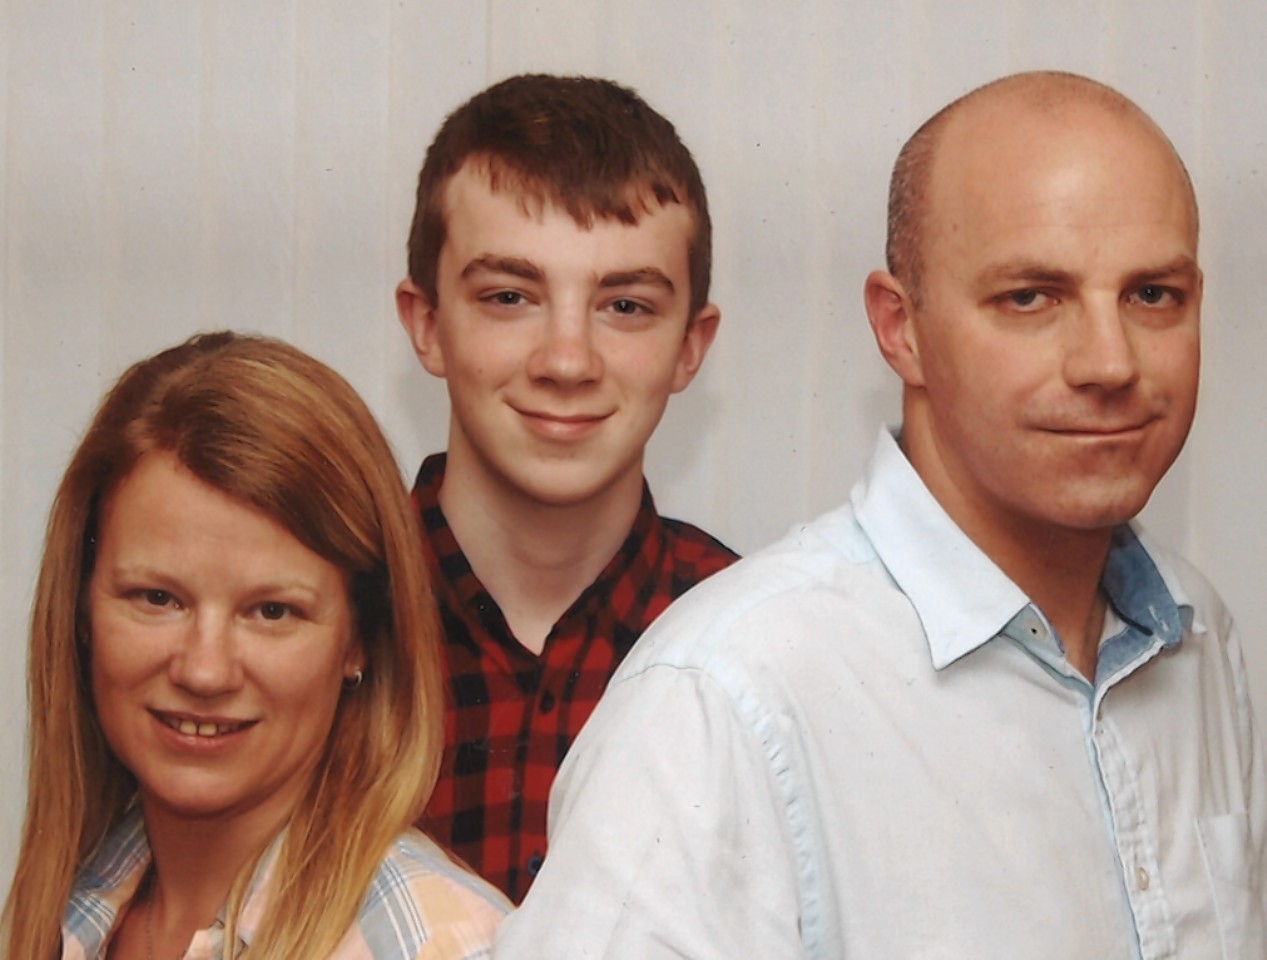 Michael McLean with his family